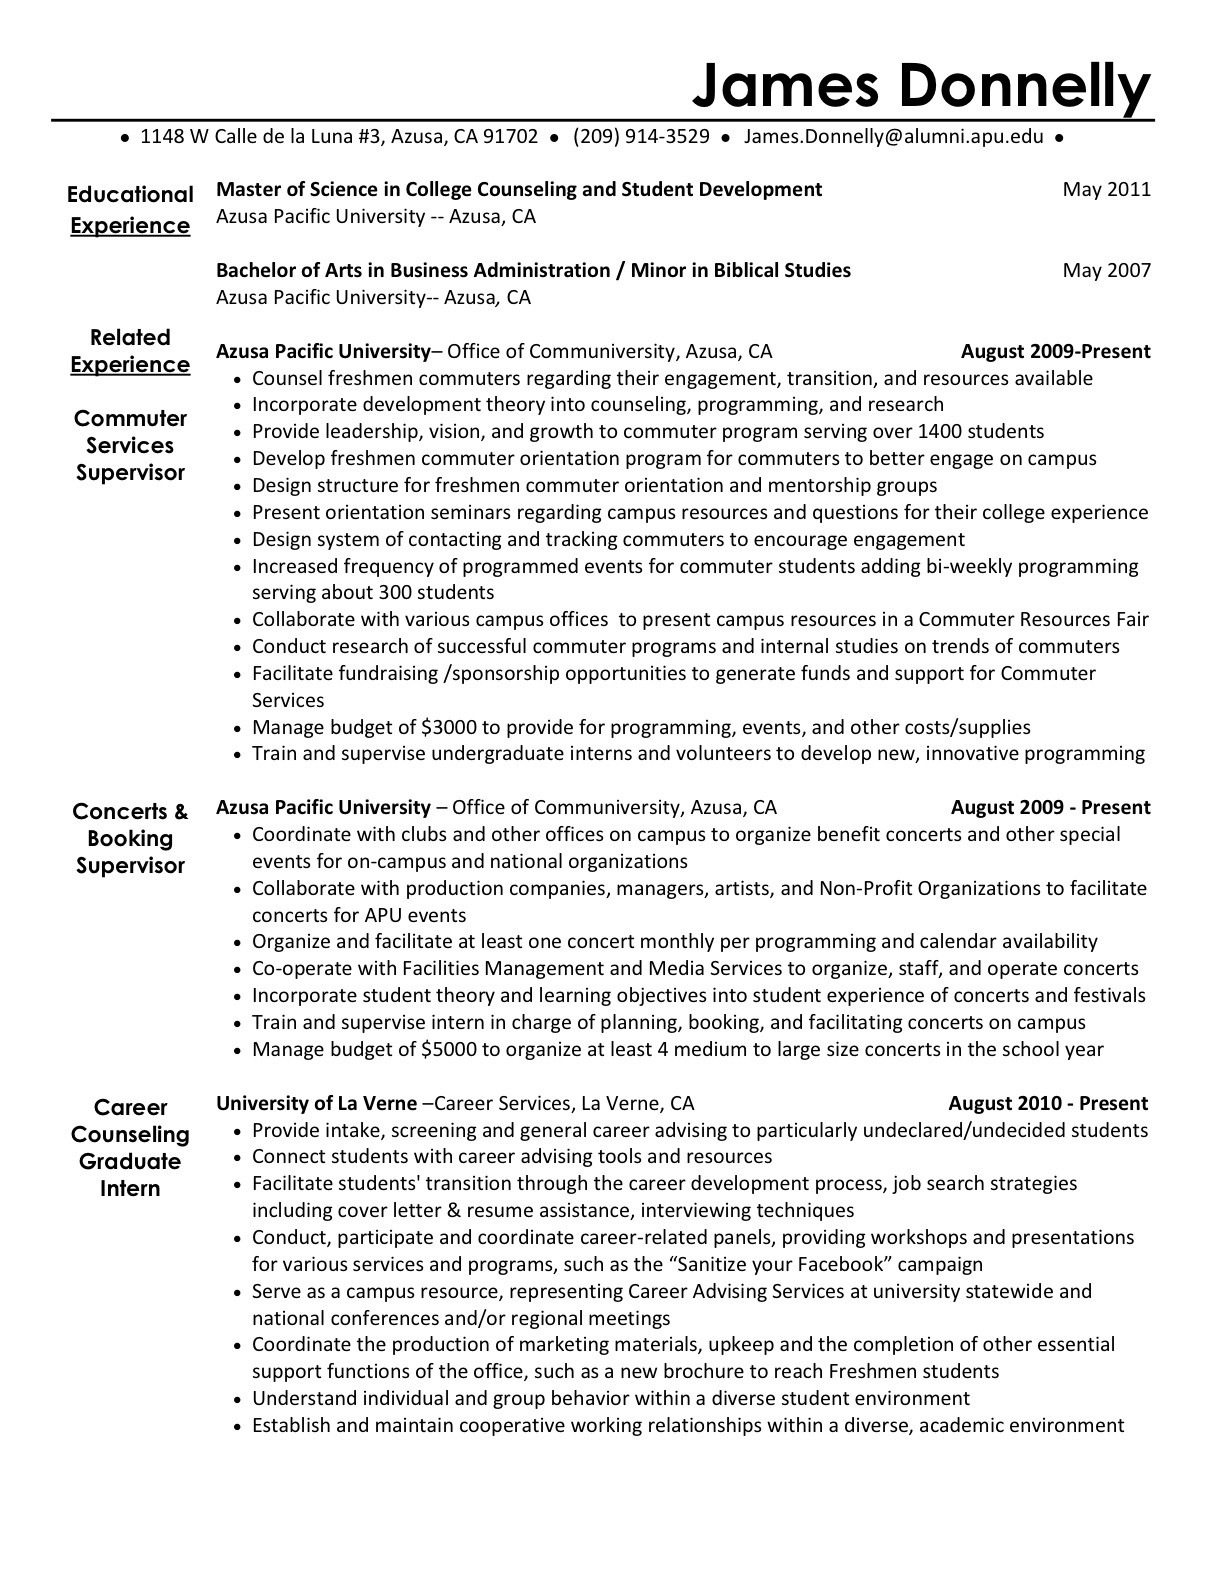 Resume Sample for Student Activities Director Student Activities Resume Jamesdonnelly